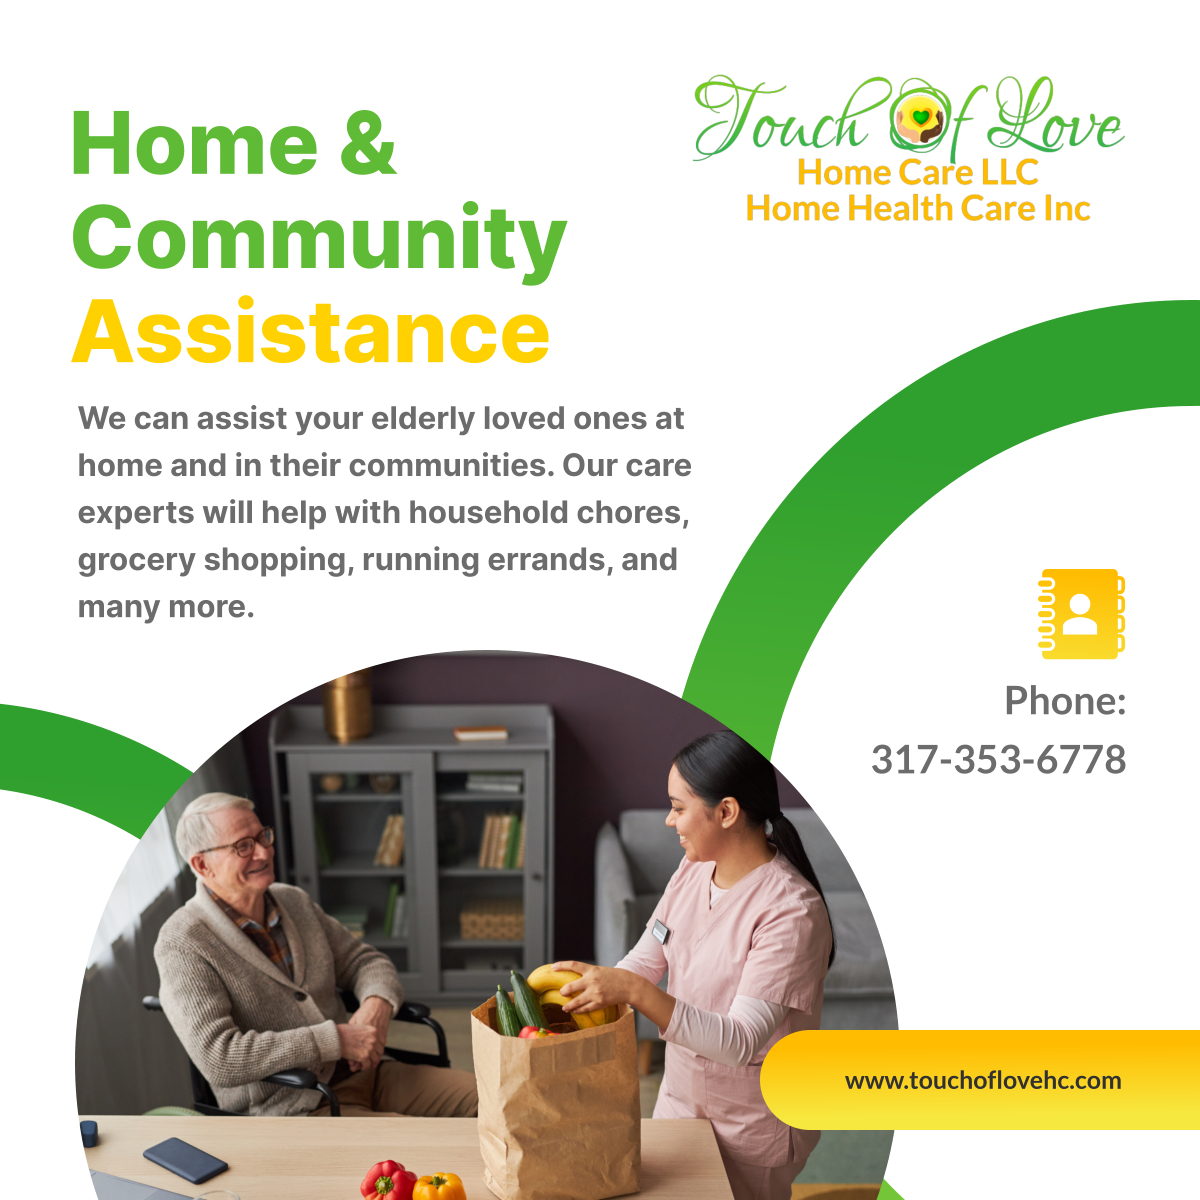 Home and community assistance can be very effective in helping seniors maintain their independence and dignity during old age. For more information, you can call us at 317-353-6778. 

#IndianapolisIN #HomeHealthCare #SeniorHomeCare